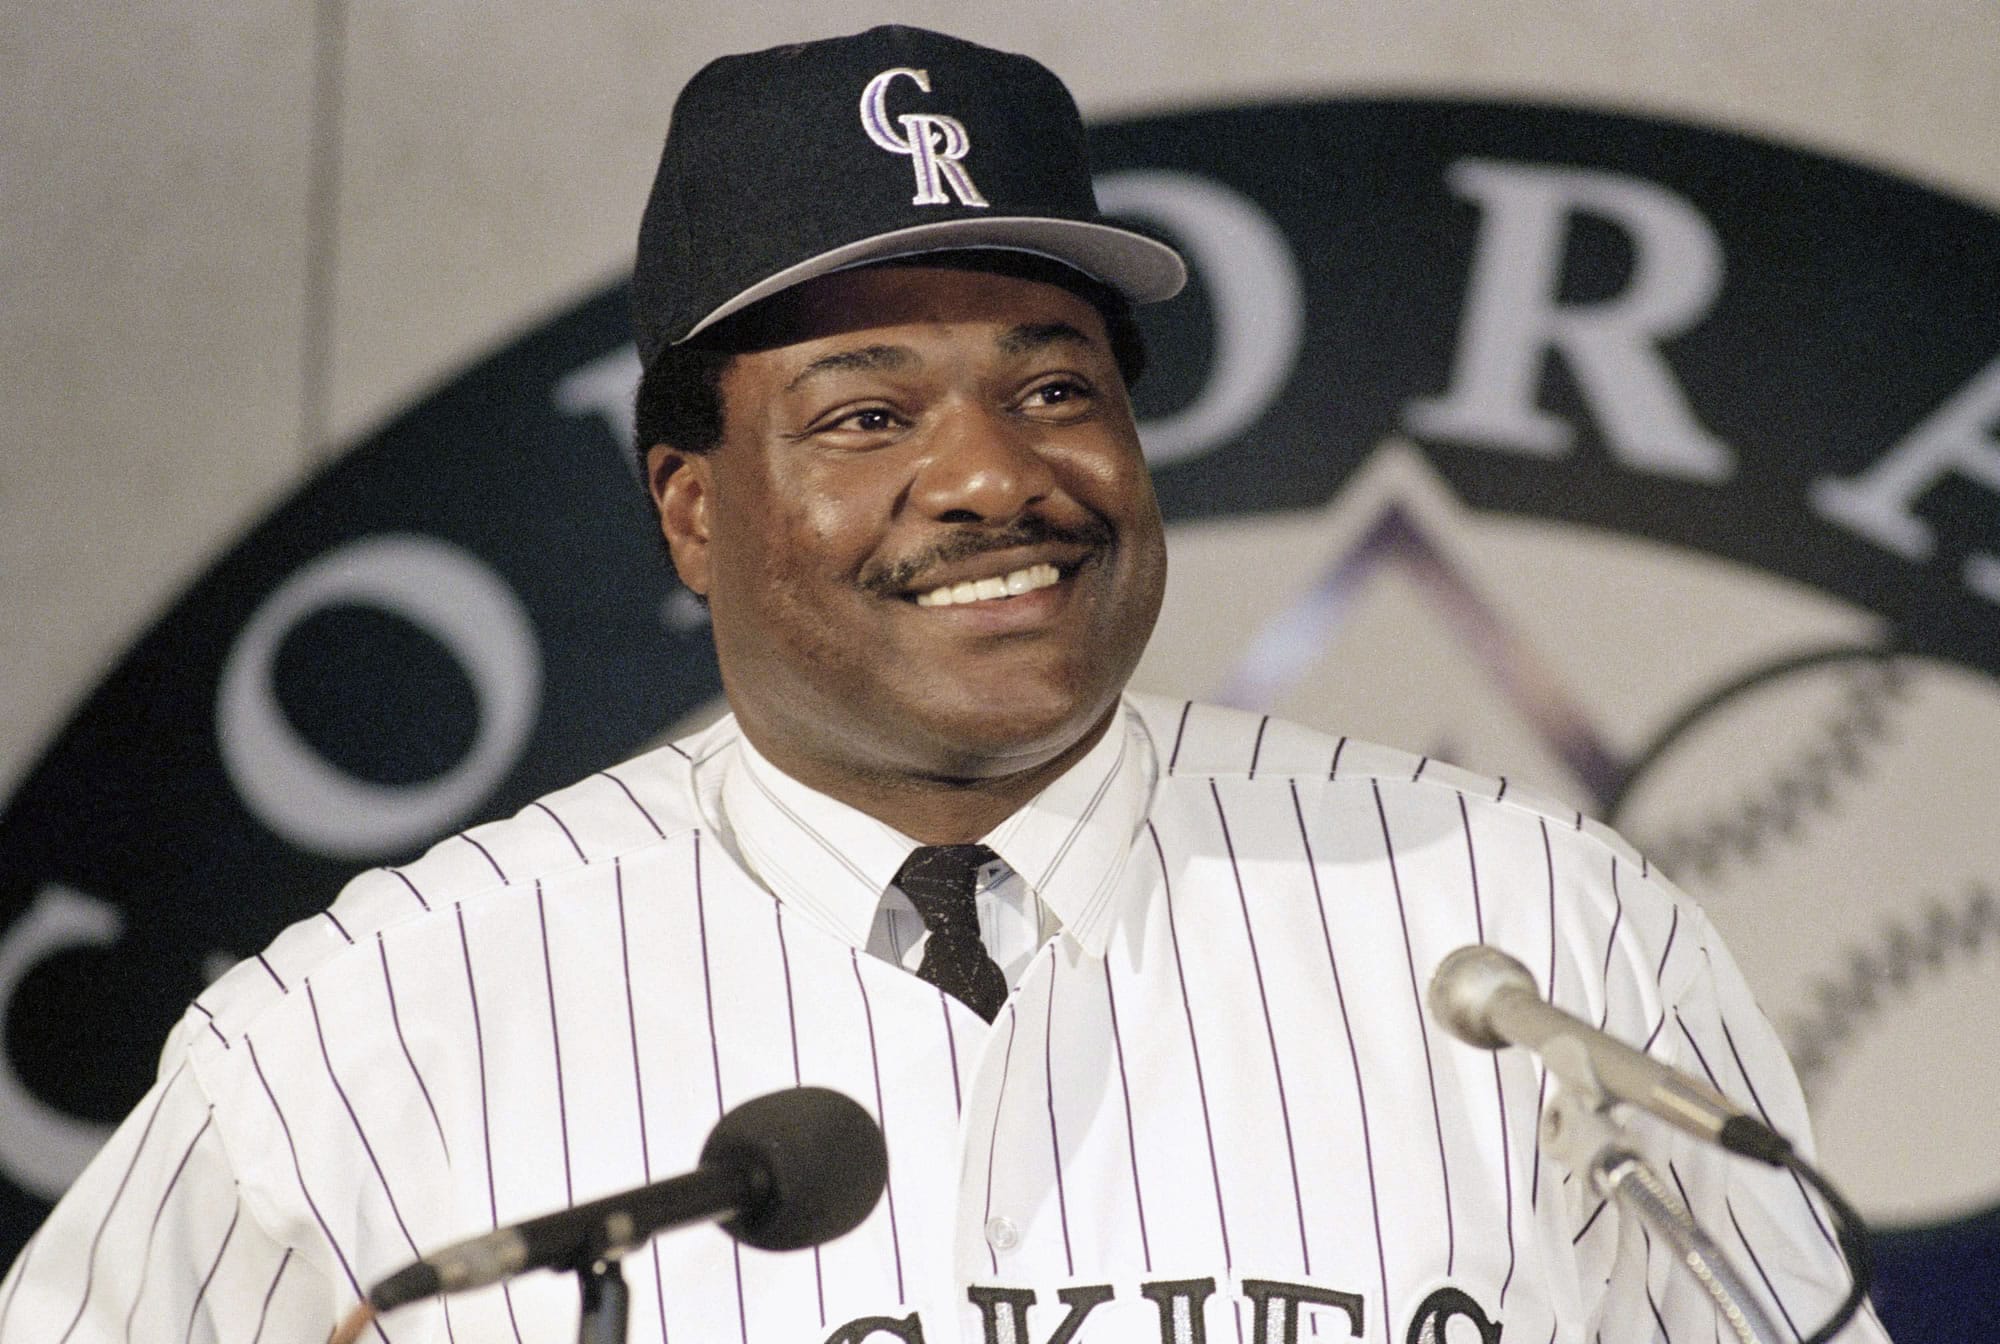 Don Baylor, pictured here in 1992 after being named the first manager of the Colorado Rockies, has died. He was 68. Baylor died Monday, Aug. 7, 2017, at a hospital in Austin, Texas.